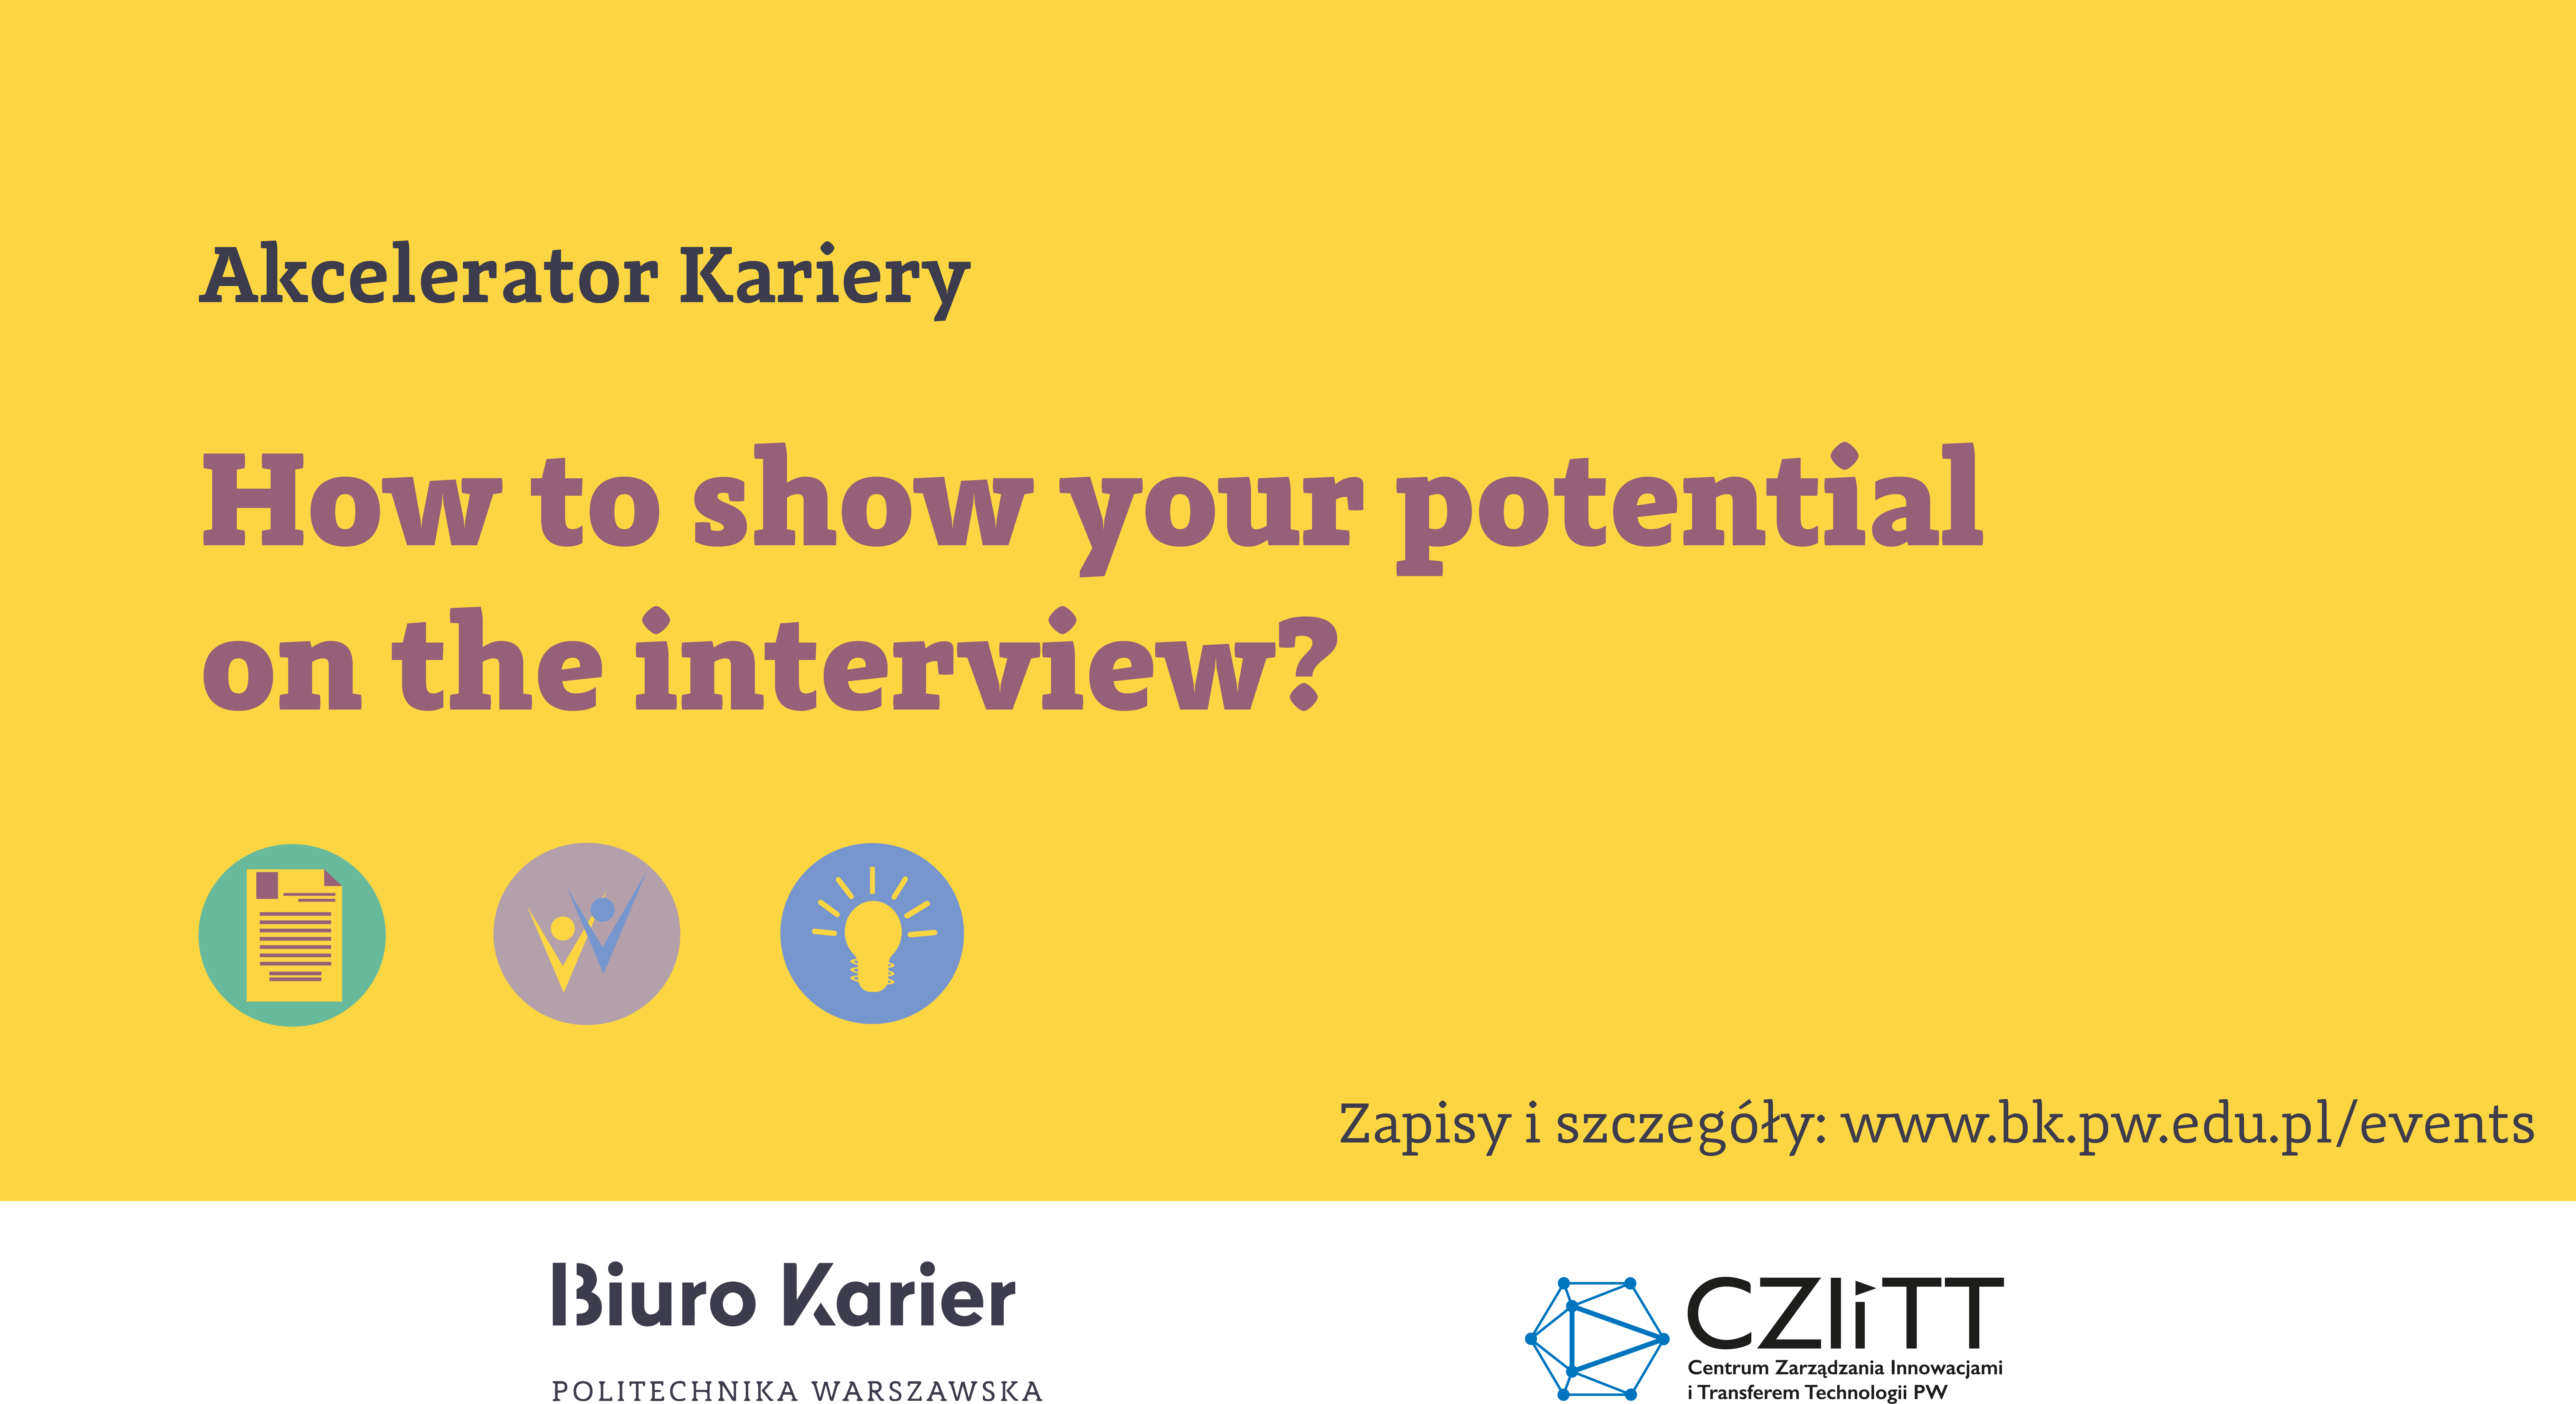 How to show your potential on the interview?